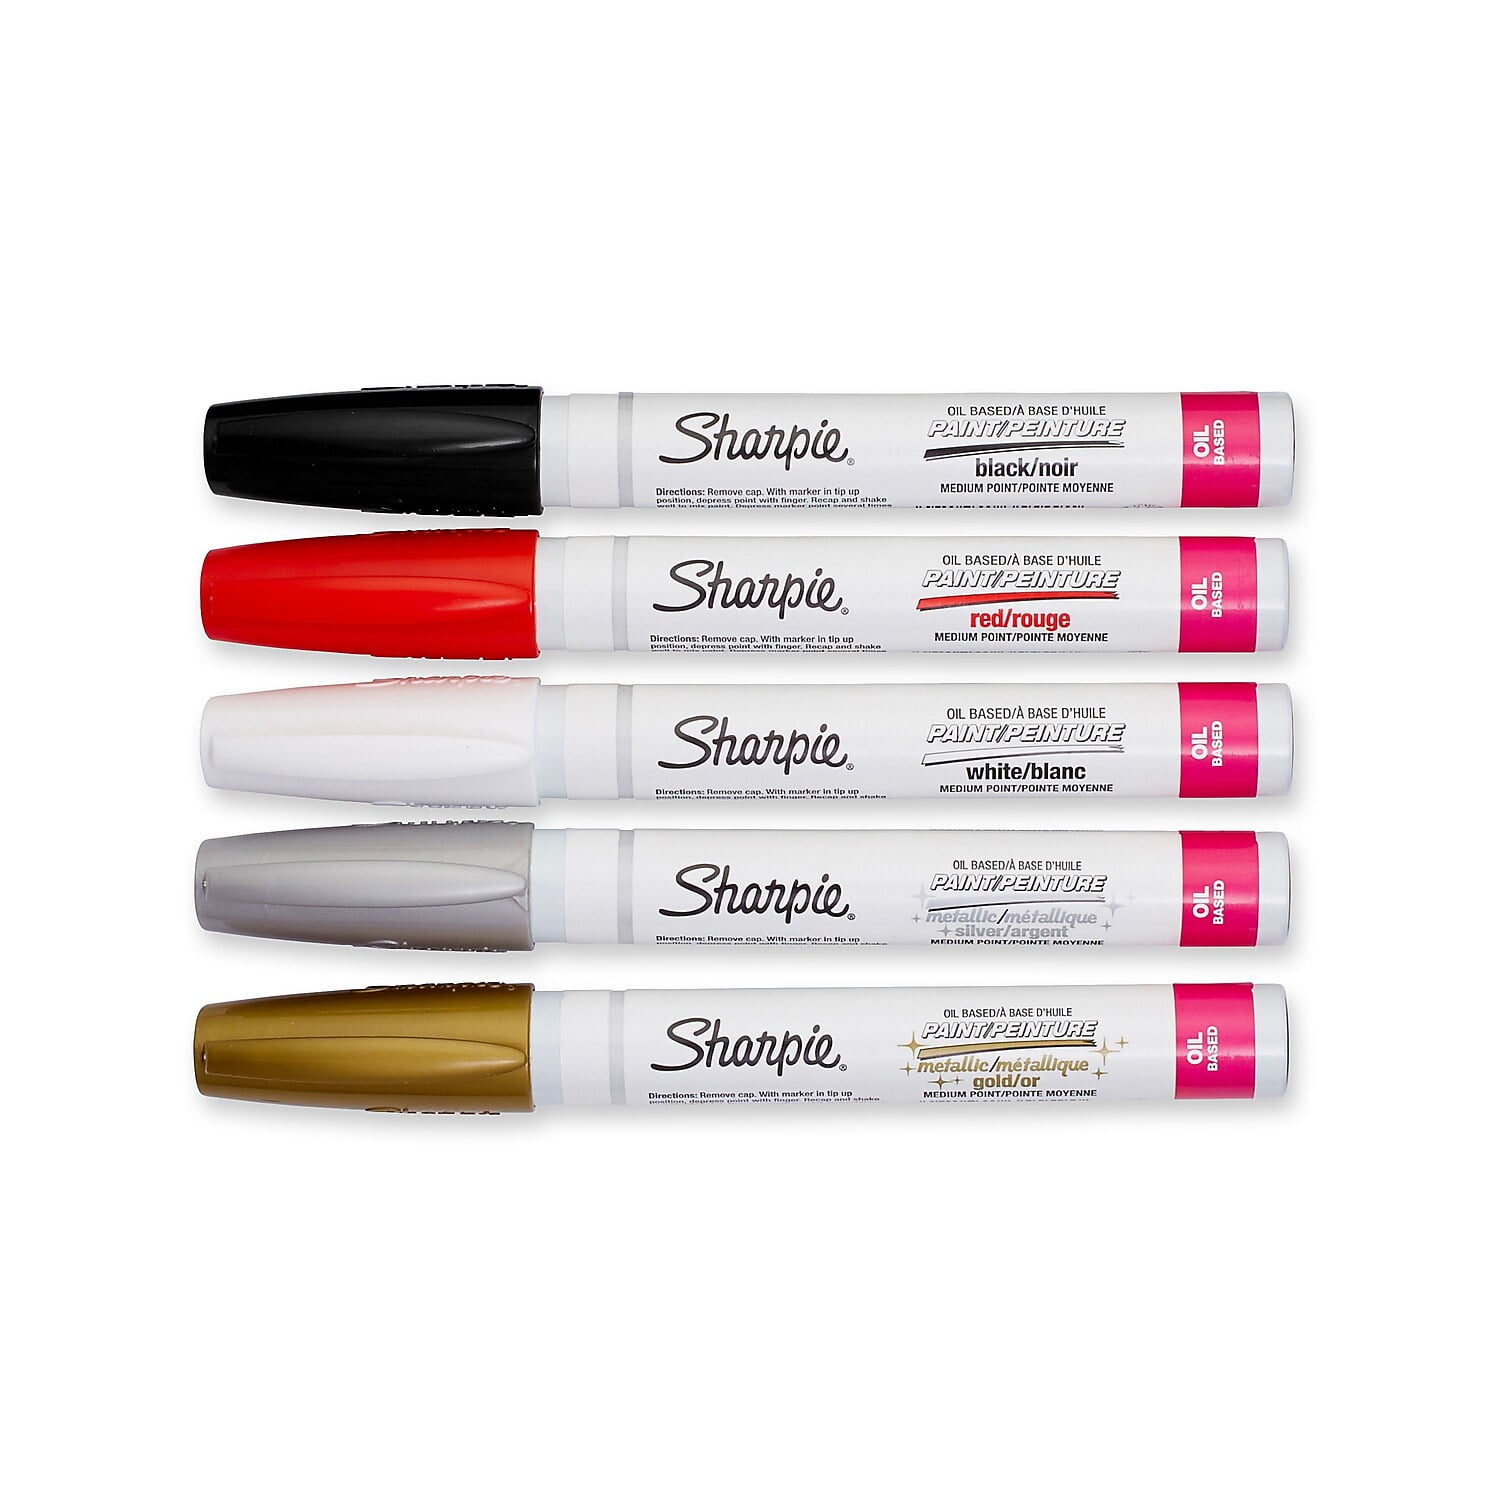 Sharpe Mfg Co Sharpie Oil Based Fashion Paint Quick Dry Permanent Marker;  Pack Of 5 1371760